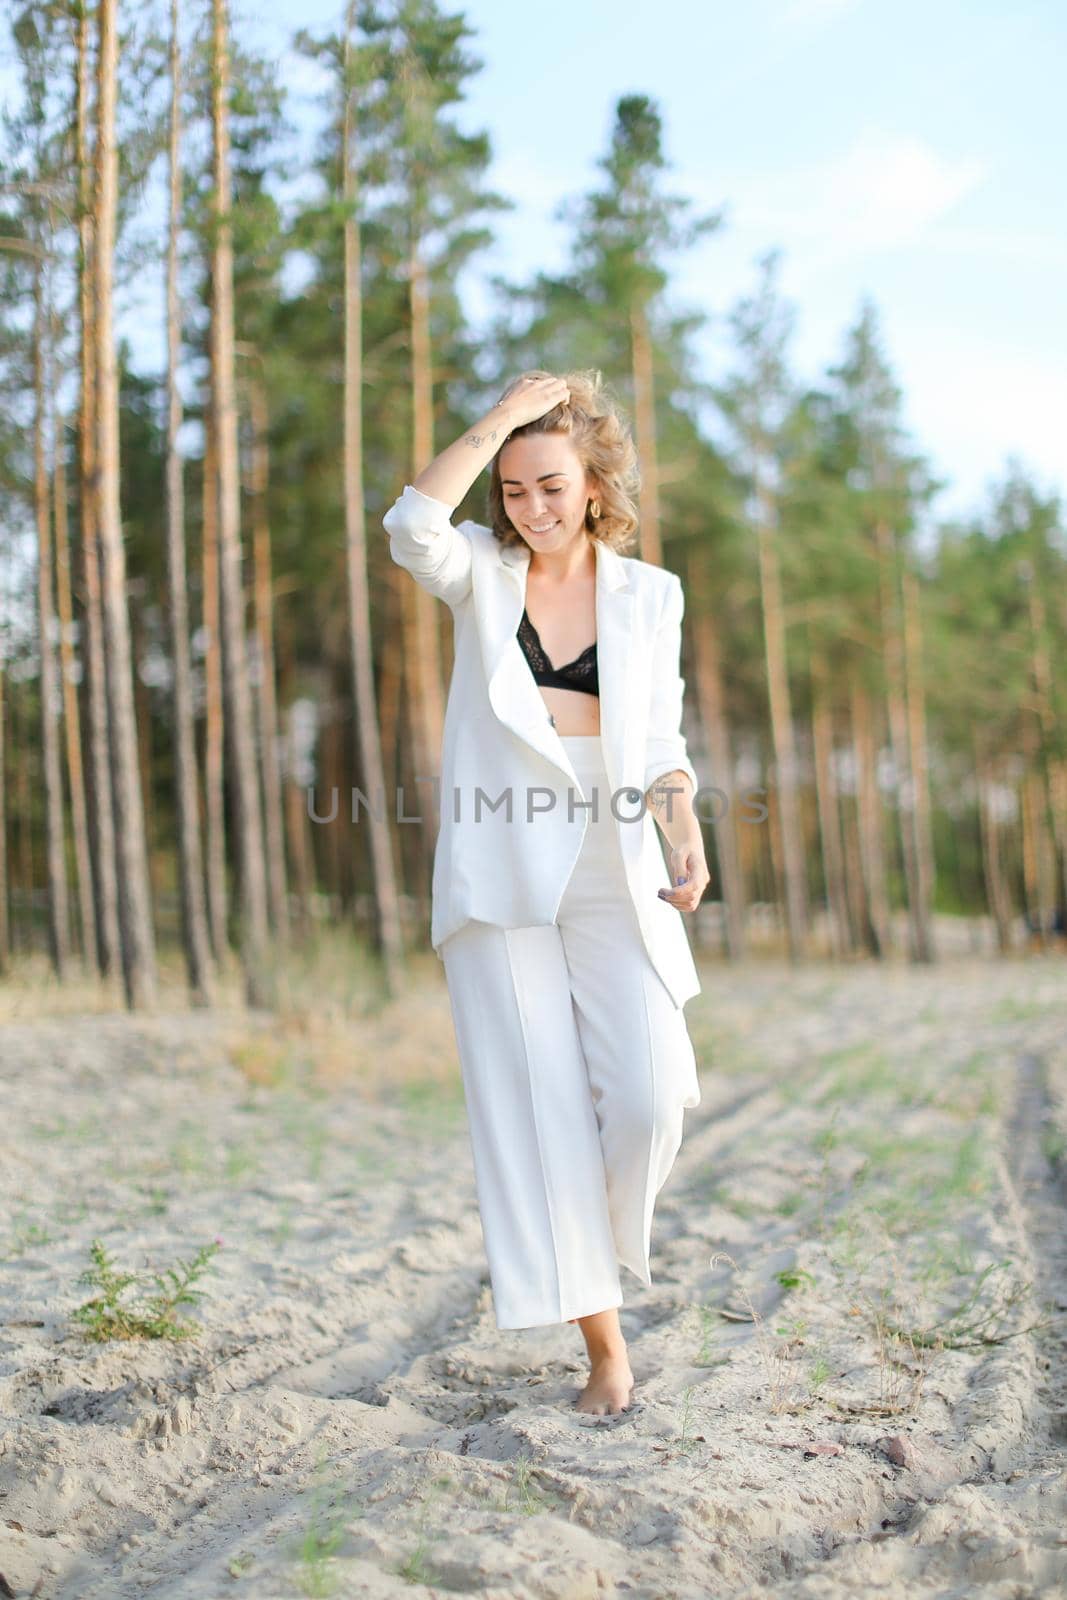 Blonde cute girl walking on sand beach and wearing white clothes. Concept of summer vacations.